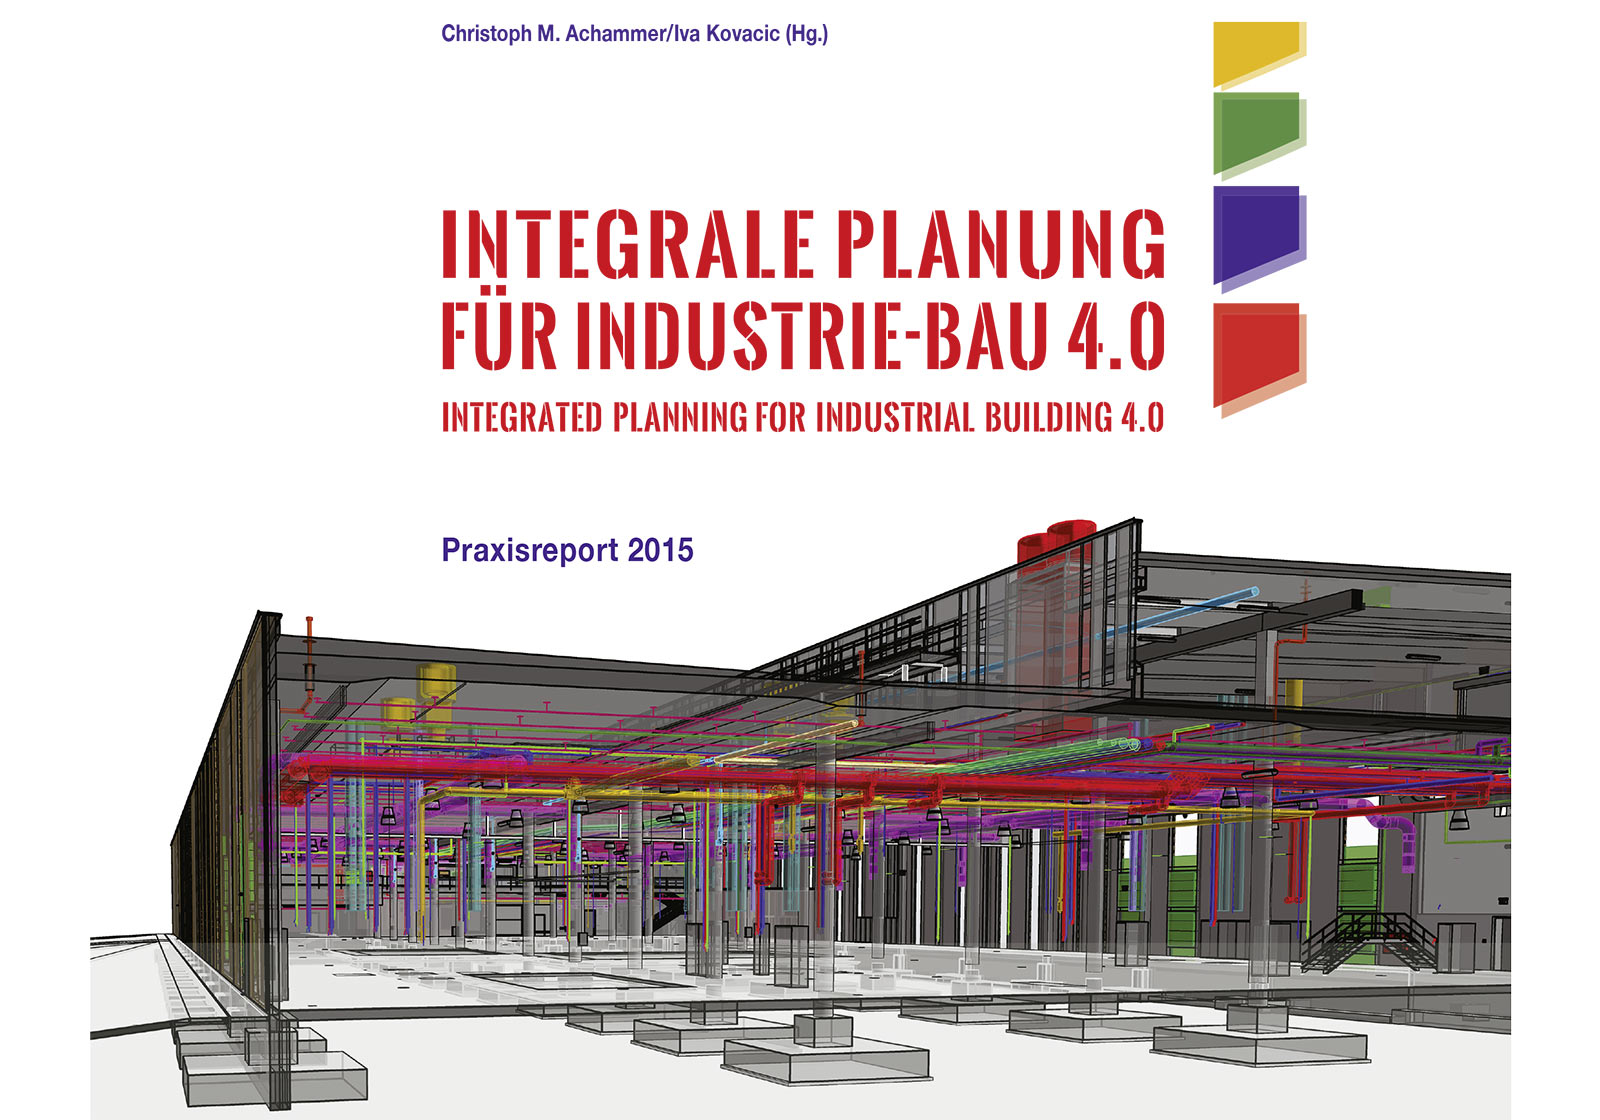 “Integrated Design for Industrial Building 4.0”